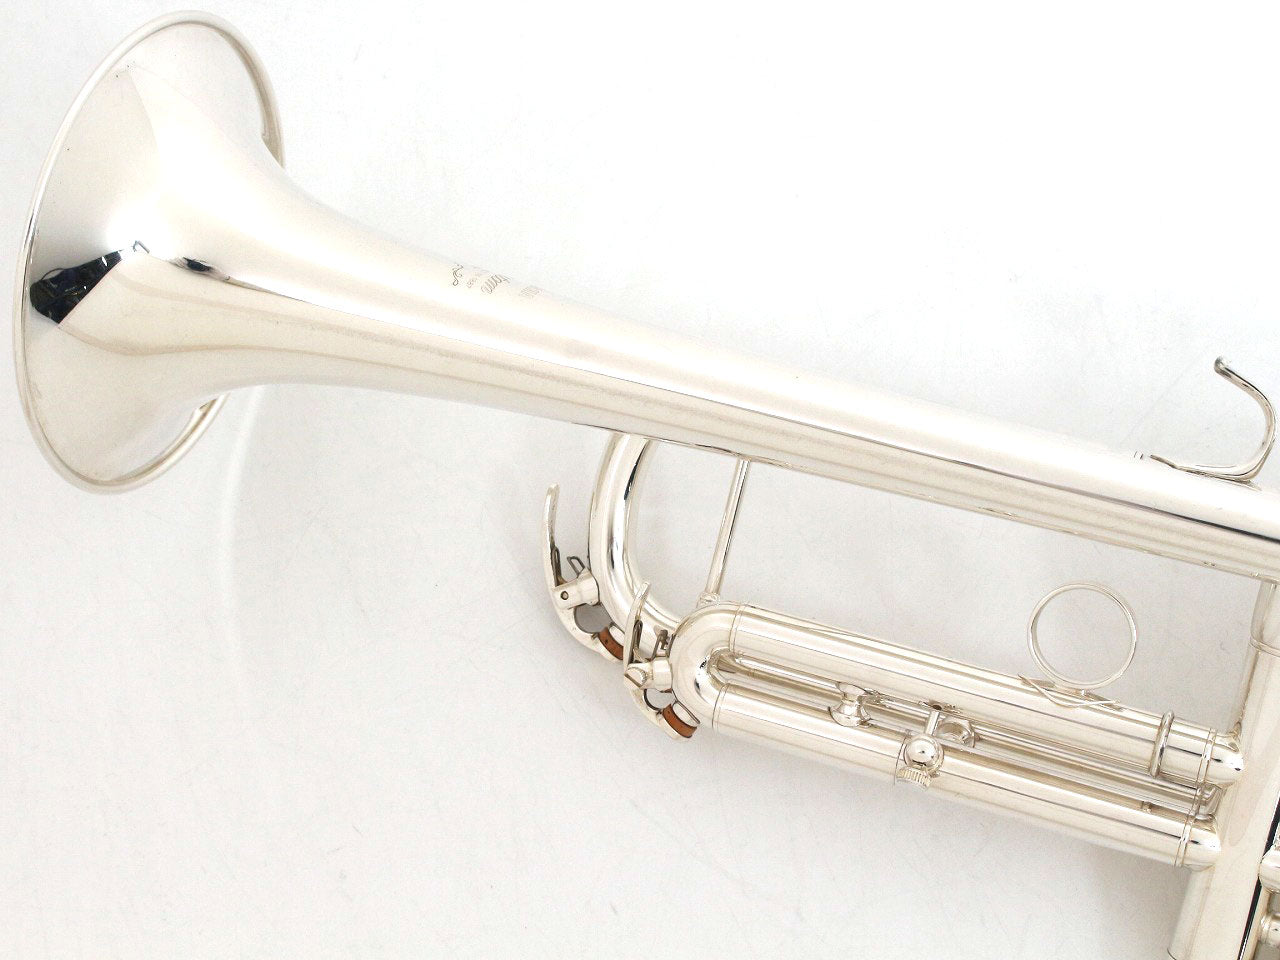 [SN 987981] USED YAMAHA / Trumpet YTR-850GS Silver plated finish [09]